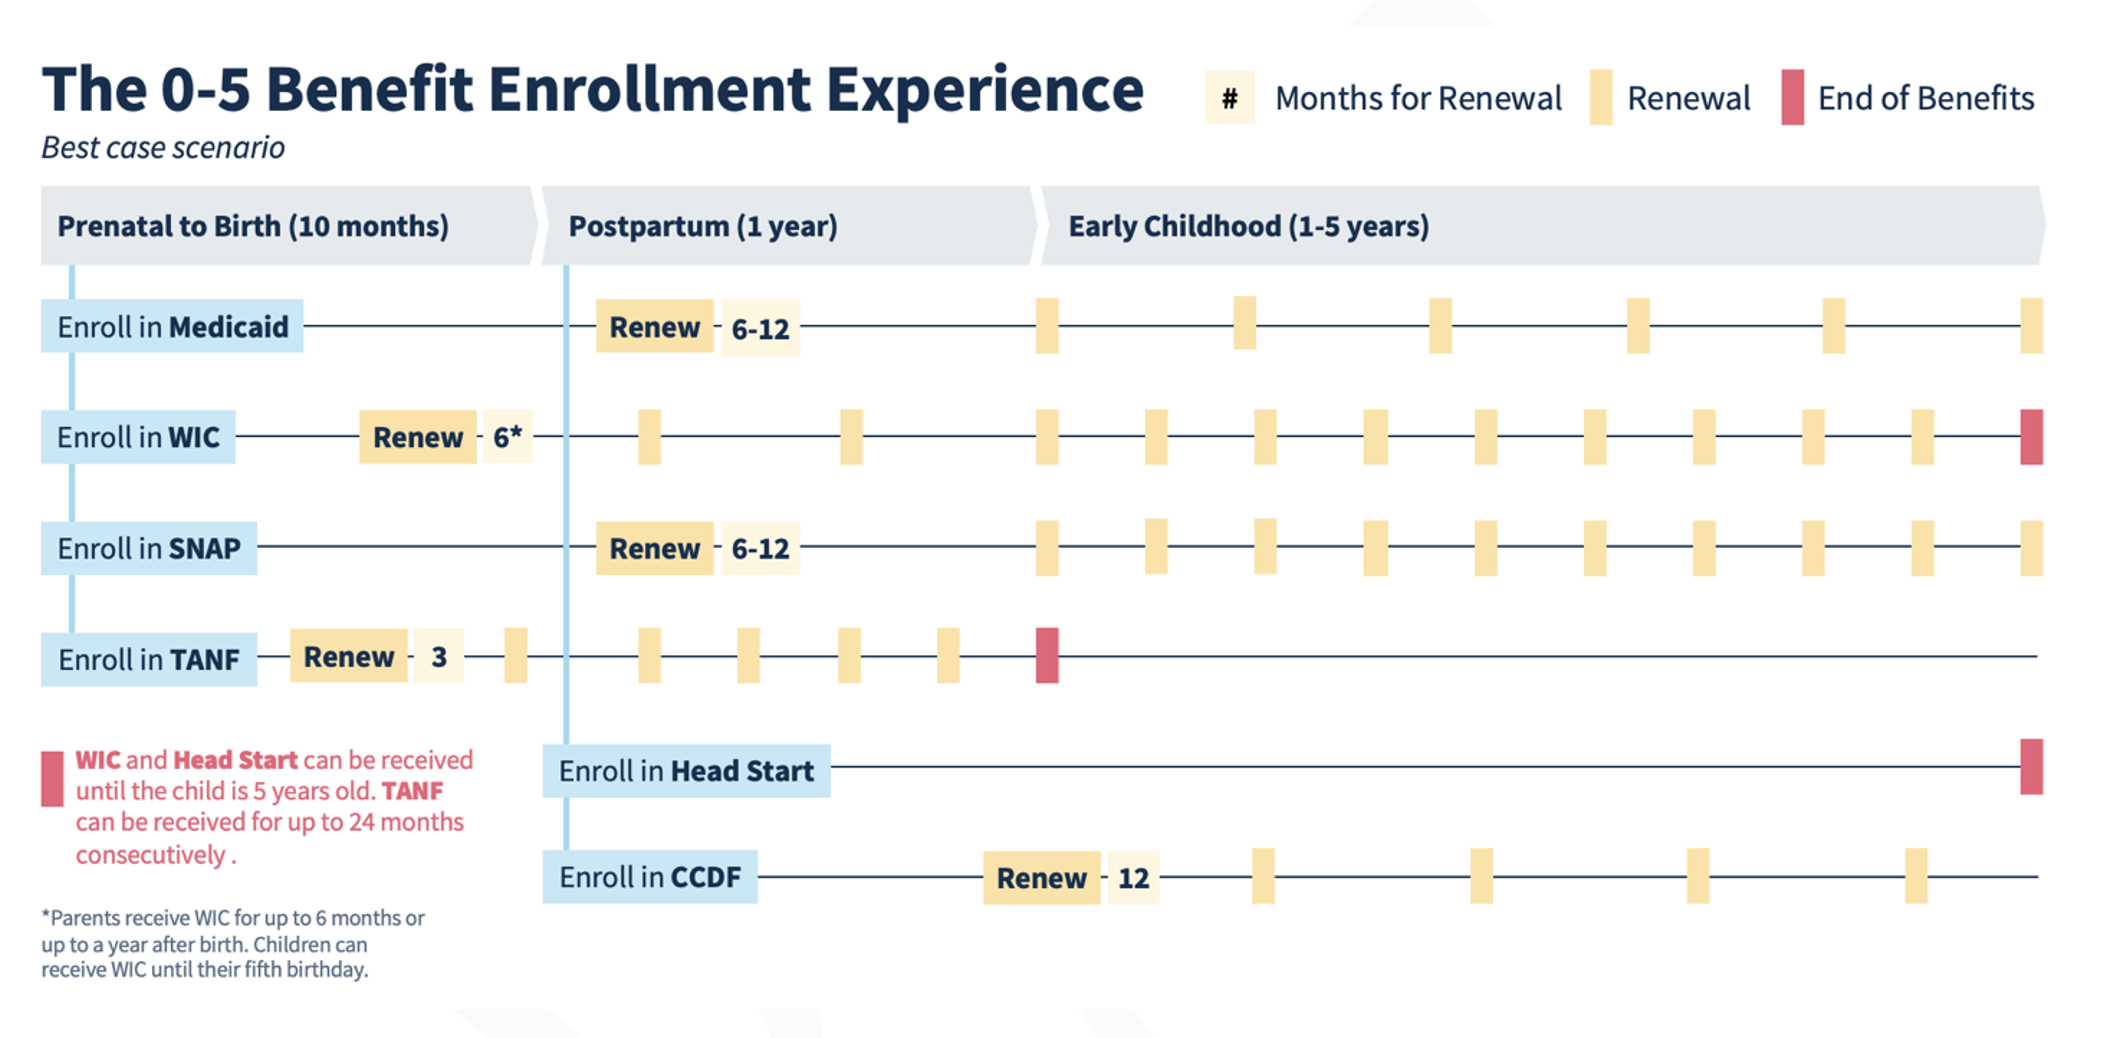 a visual timeline conveying events in the benefits enrollment process